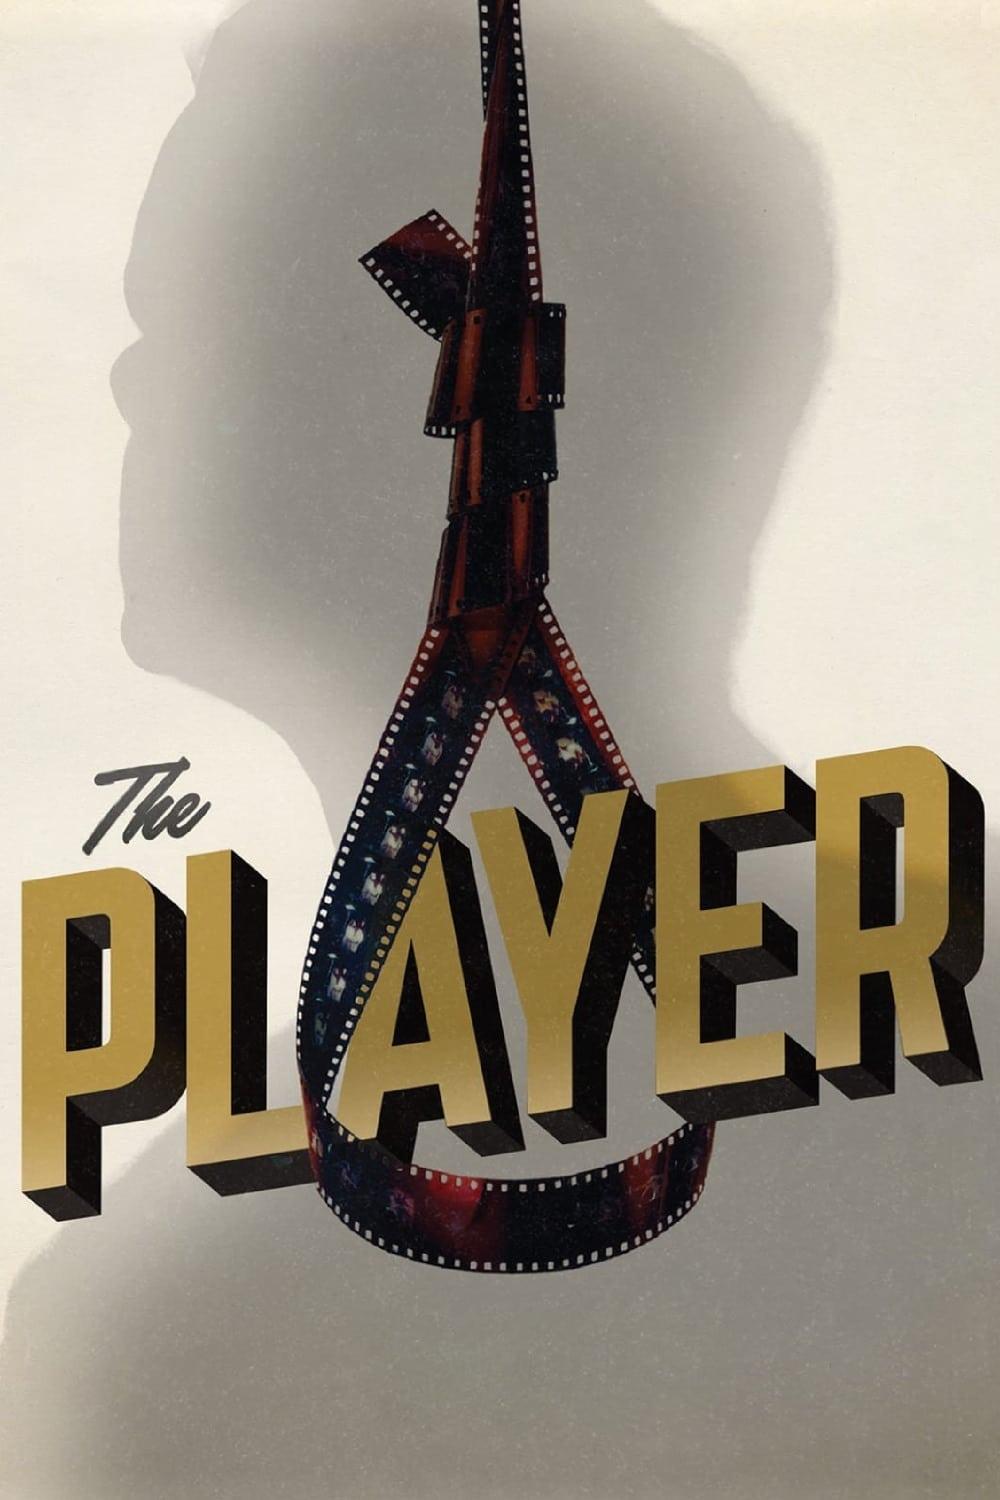 The Player poster